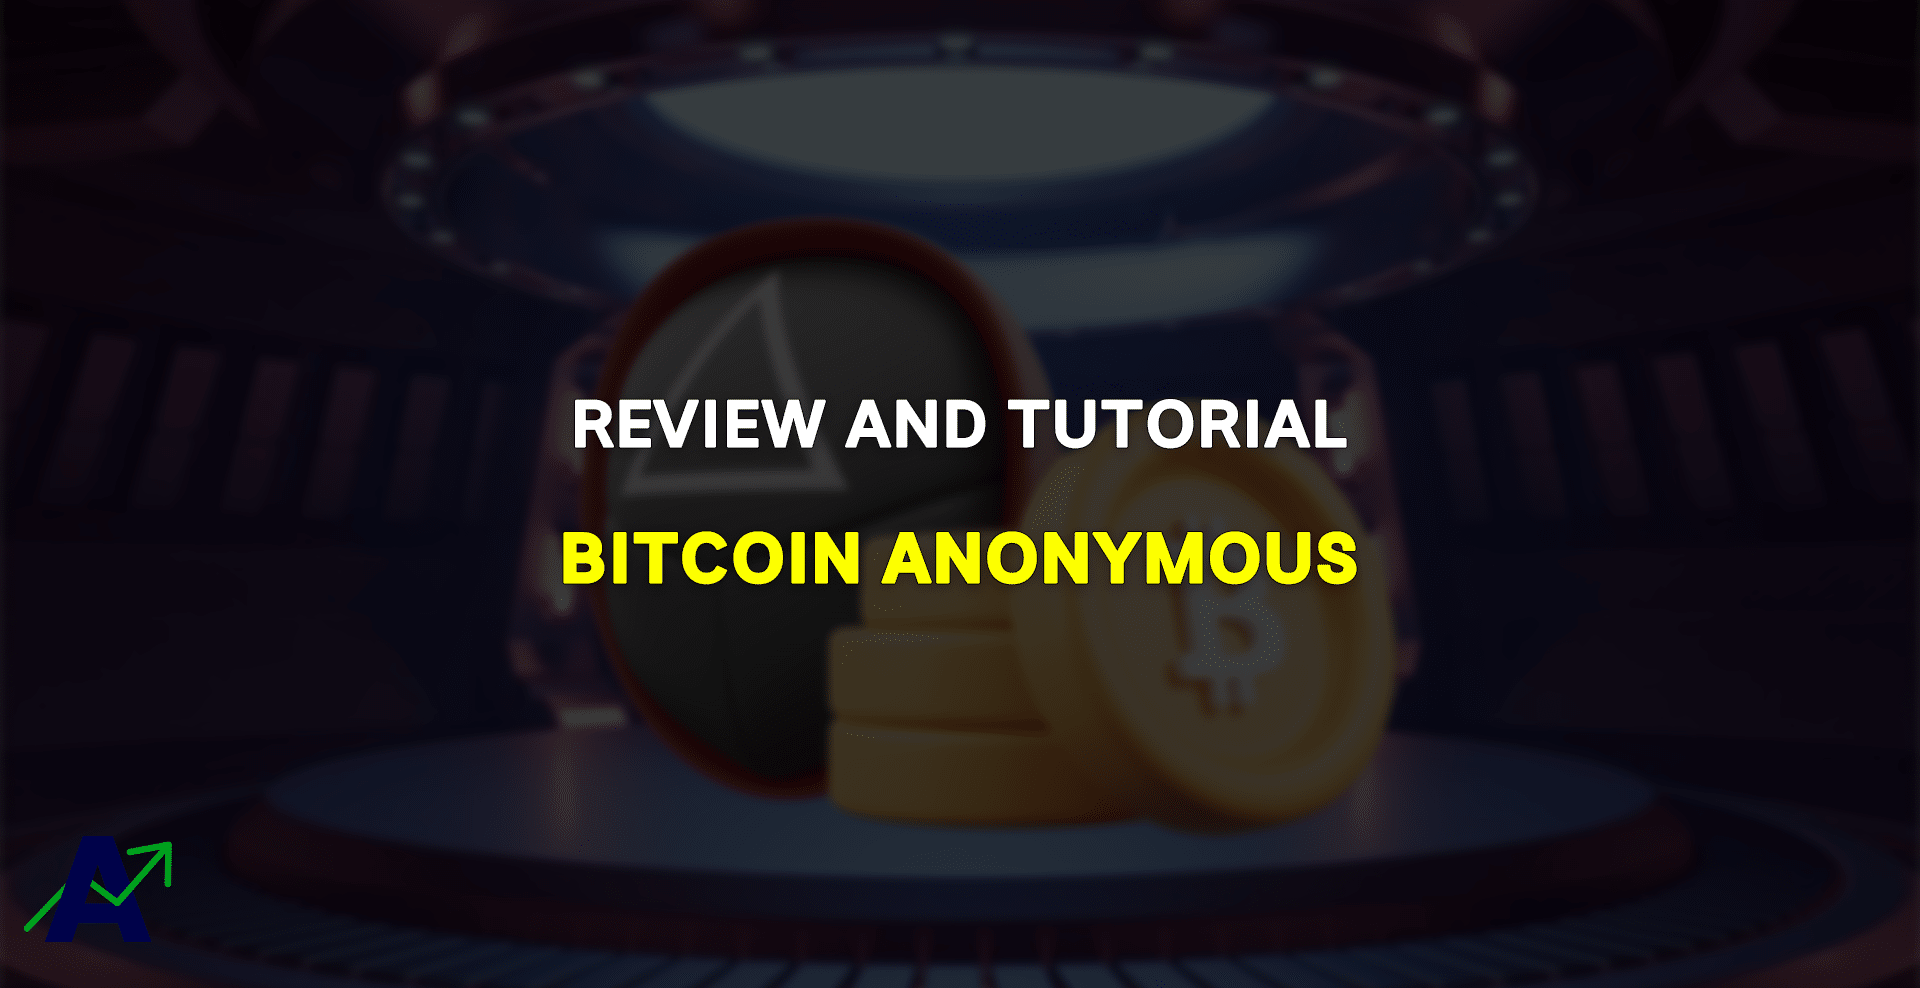 is Bitcoin Anonymous